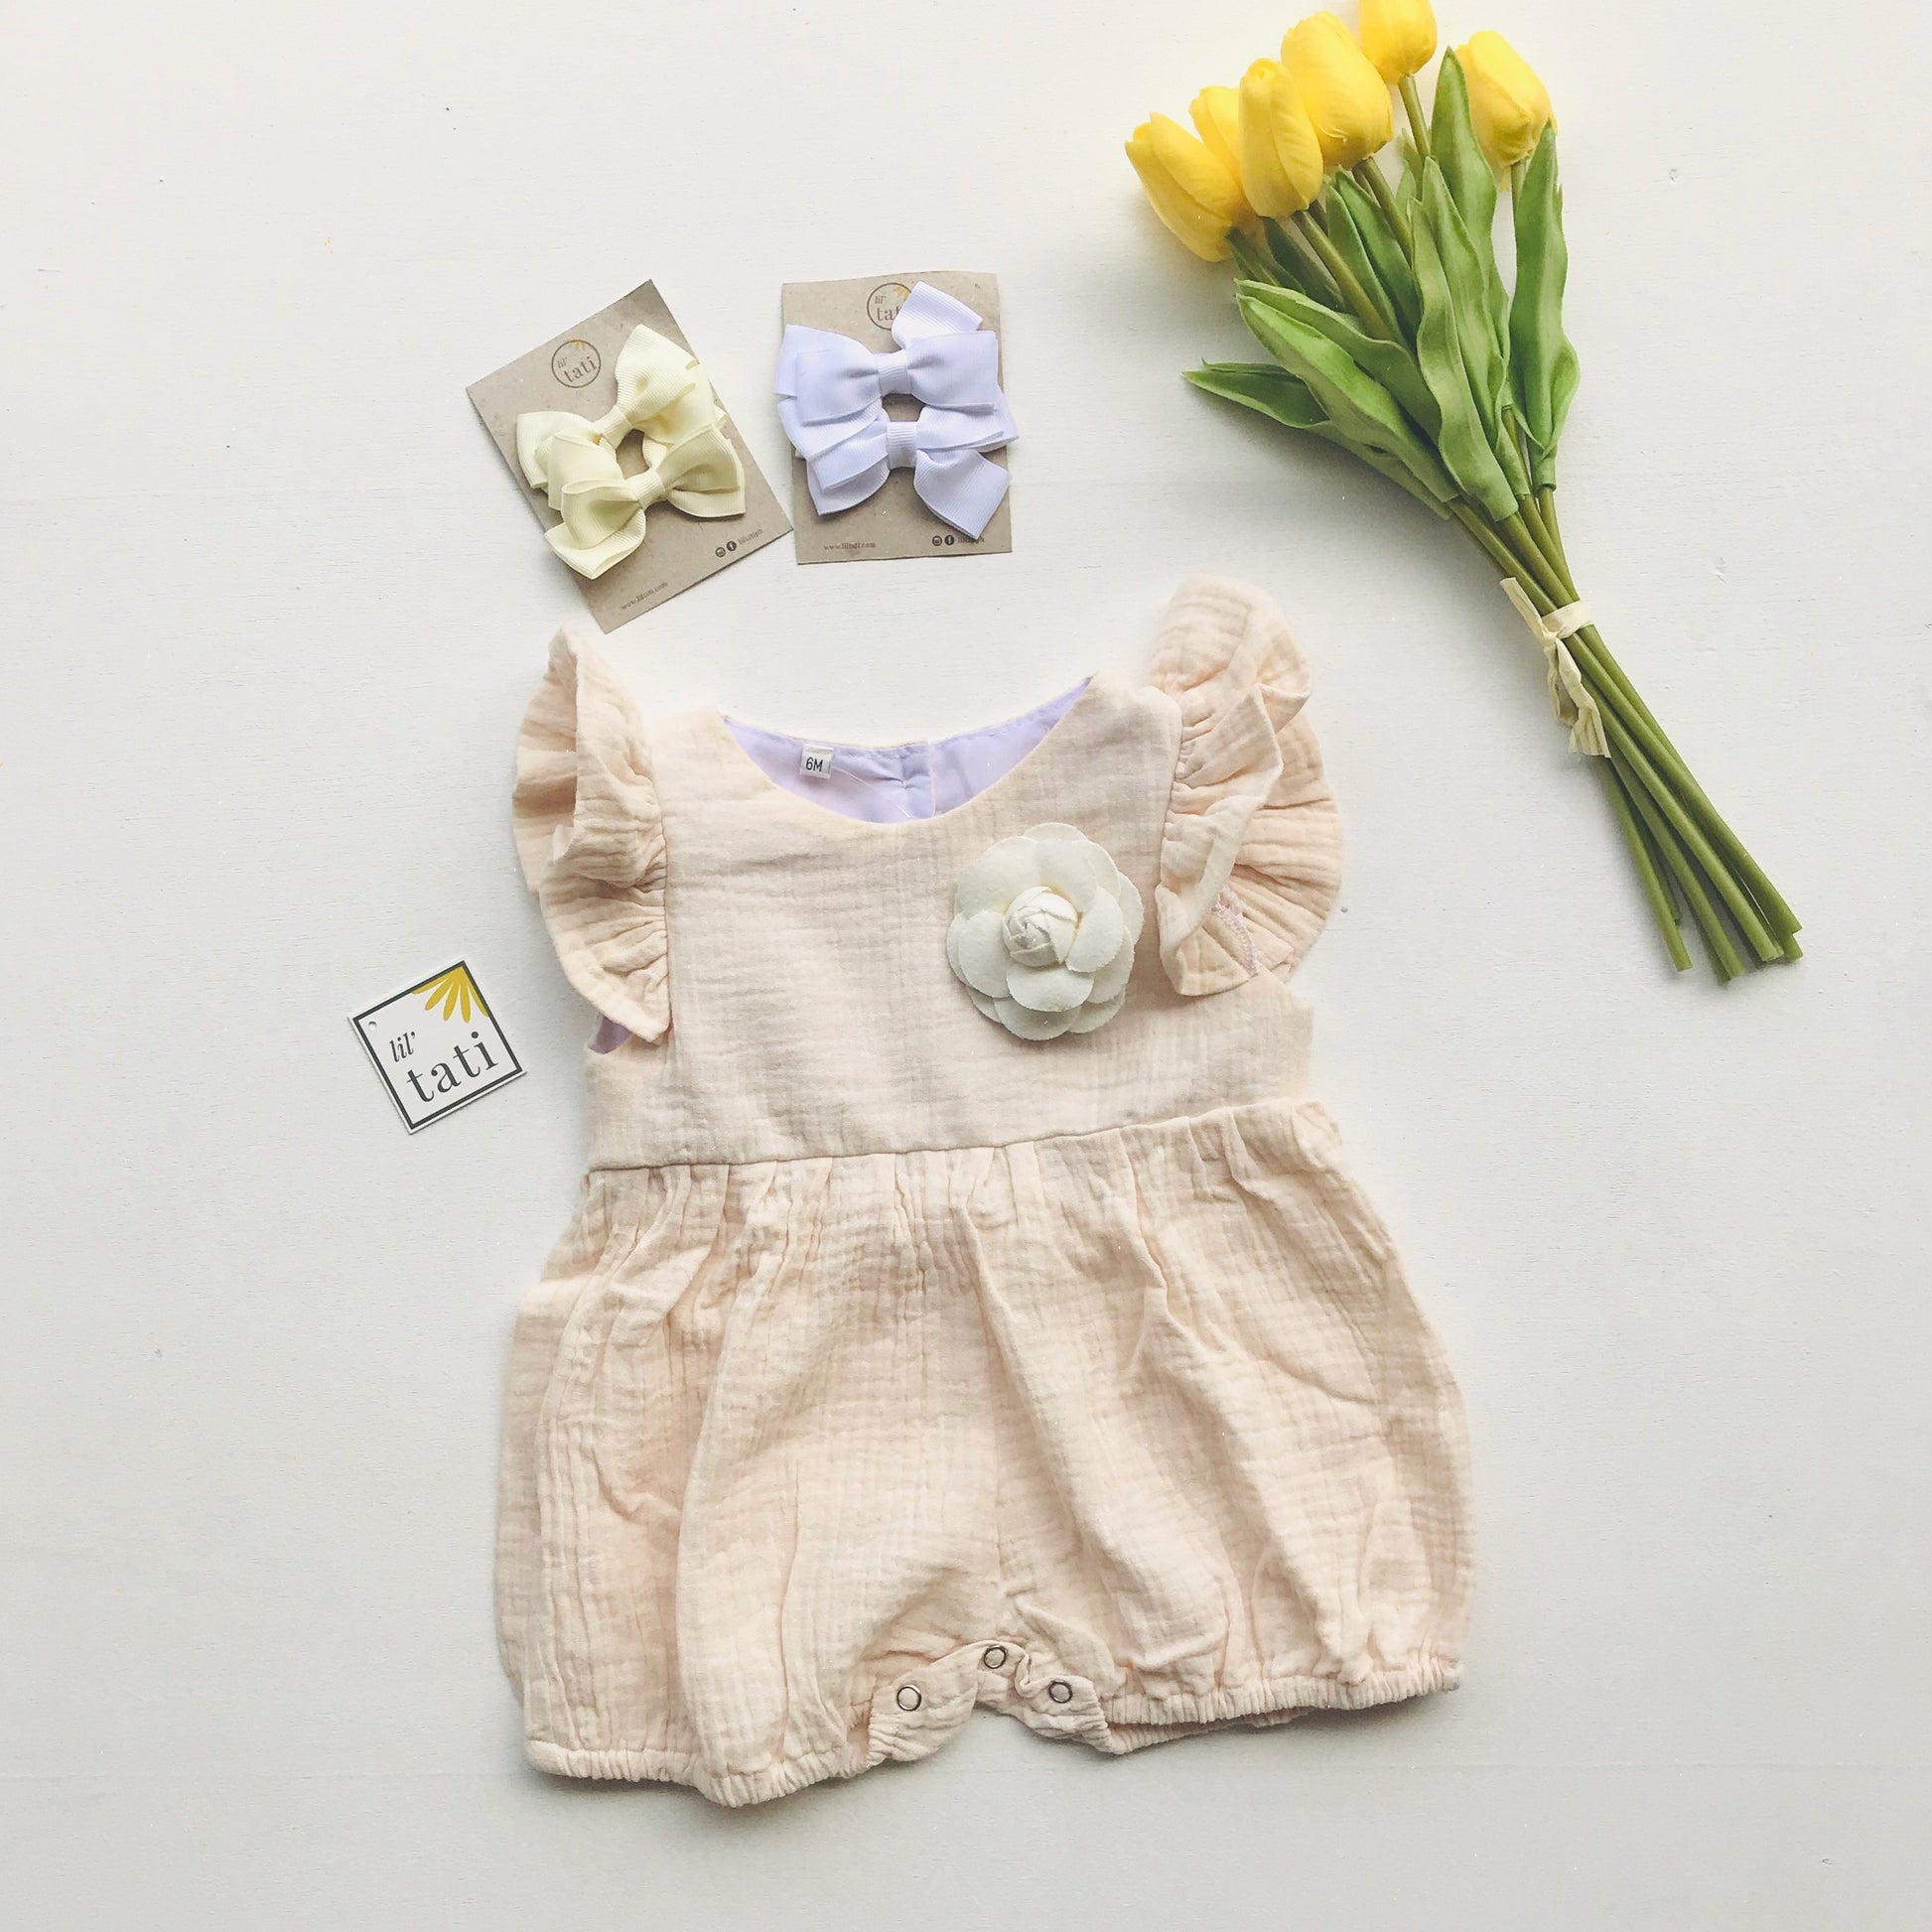 Orchid Playsuit - Ruffle Sleeves in Crepe - Cream - Lil' Tati